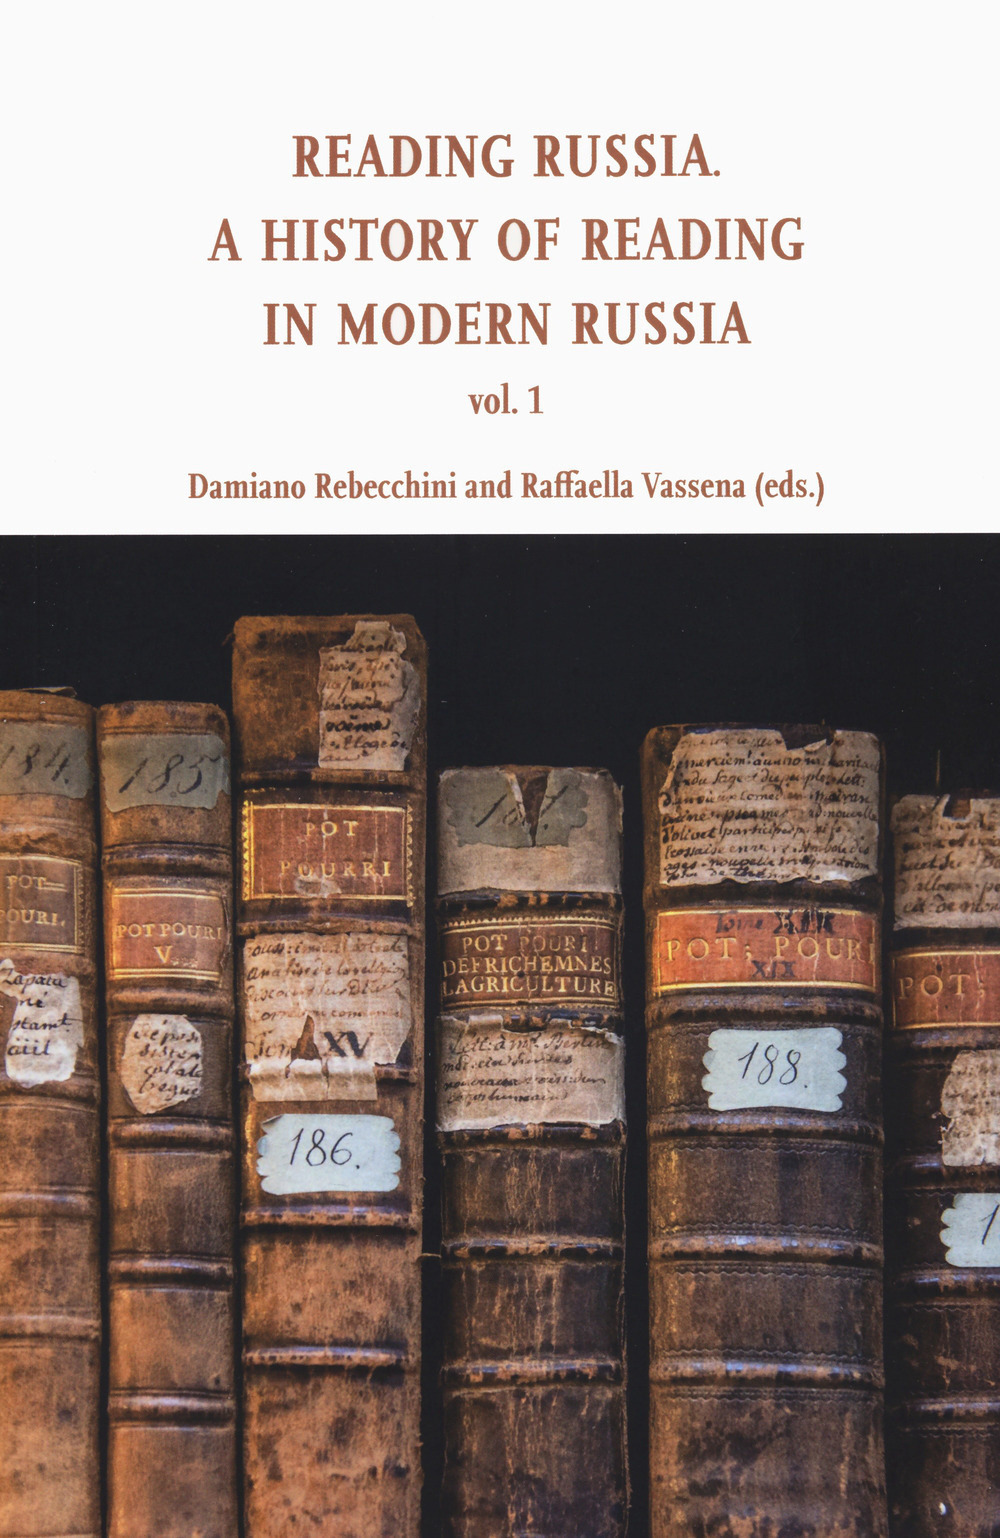 Reading in Russia. A history of reading in modern Russia. Vol. 1